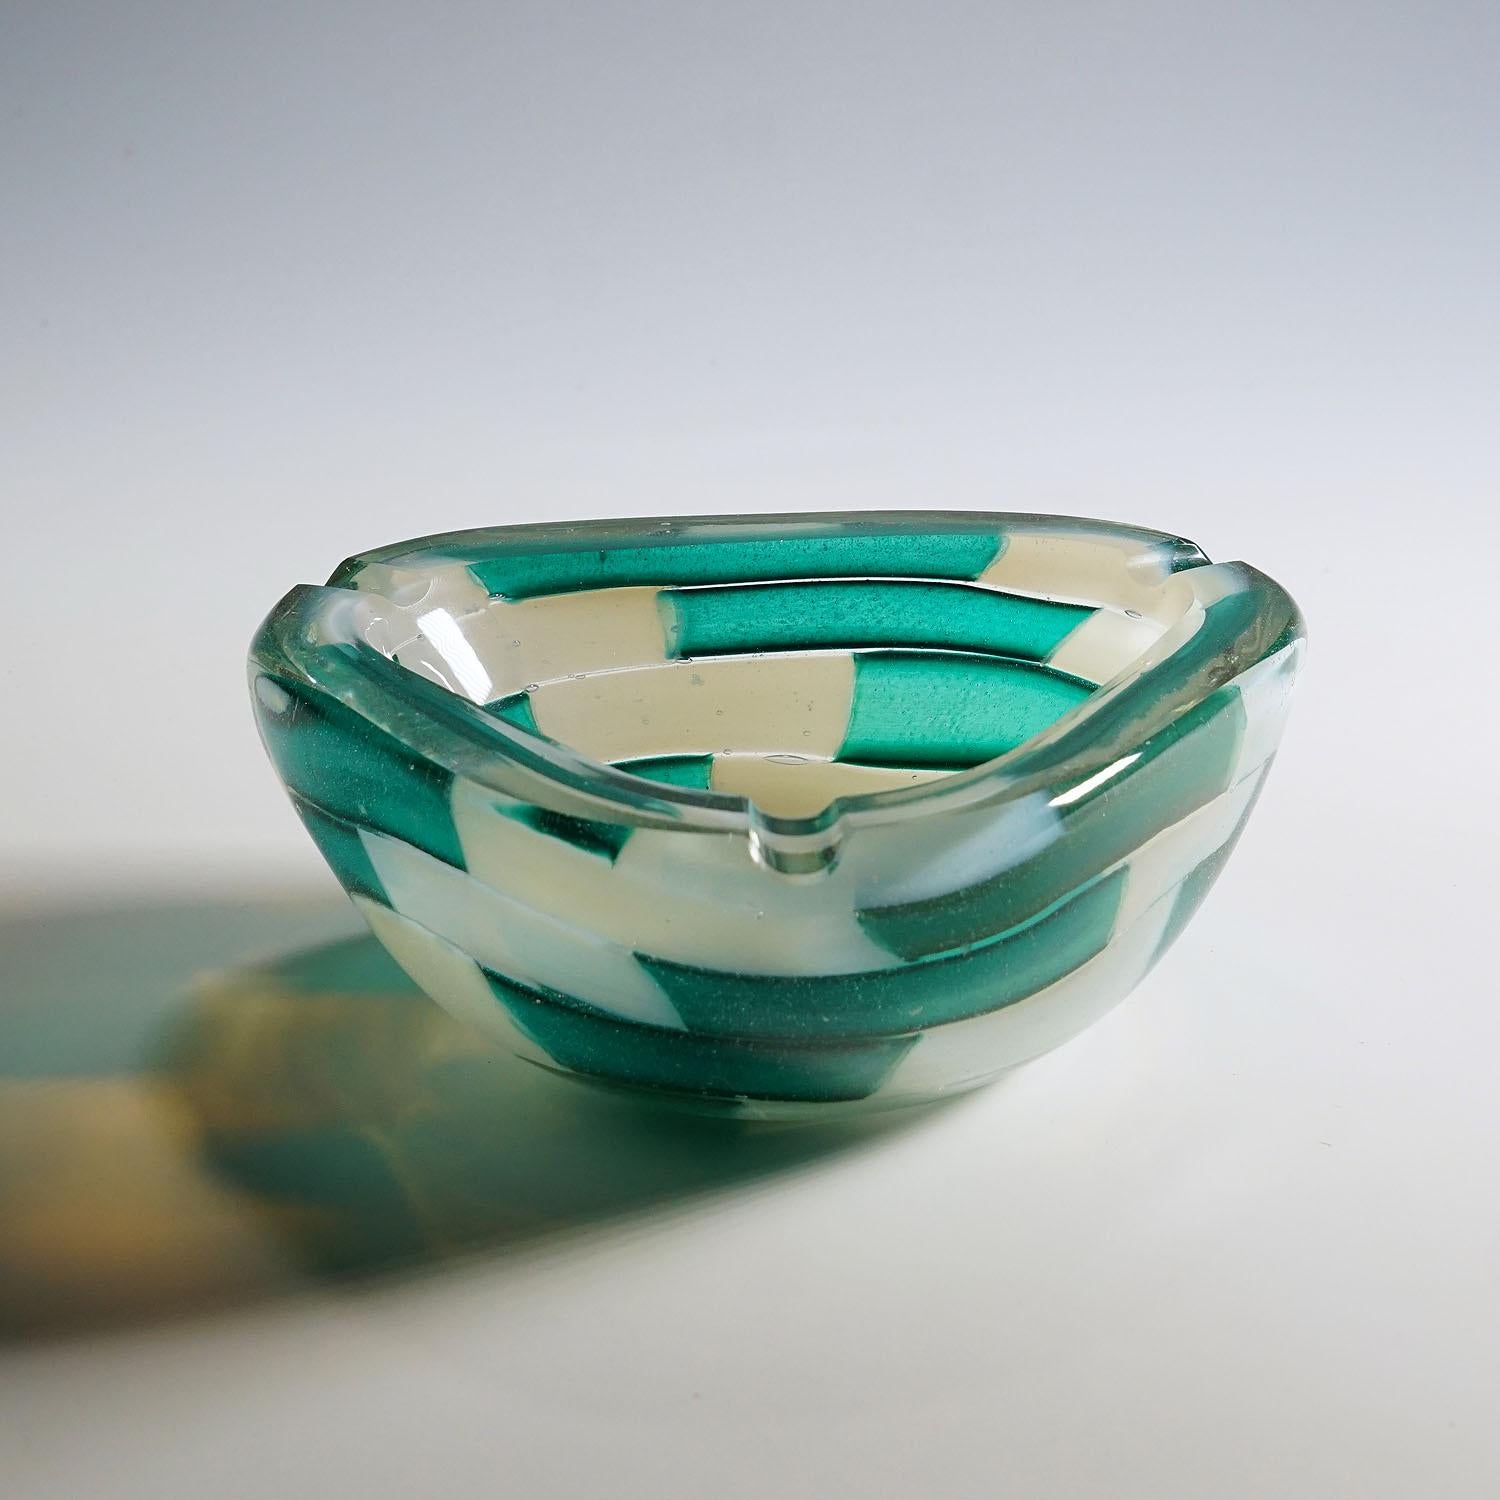 Vintage Murano Pezzato Art Glass Ashtray by Barovier & Toso 1950s

A heavy Murano art glass ashtray designed by Ercole Barovier and manufactured by Barovier & Toso, Italy circa 1950s. Heavy hot moulded glass internally decorated with opaline and